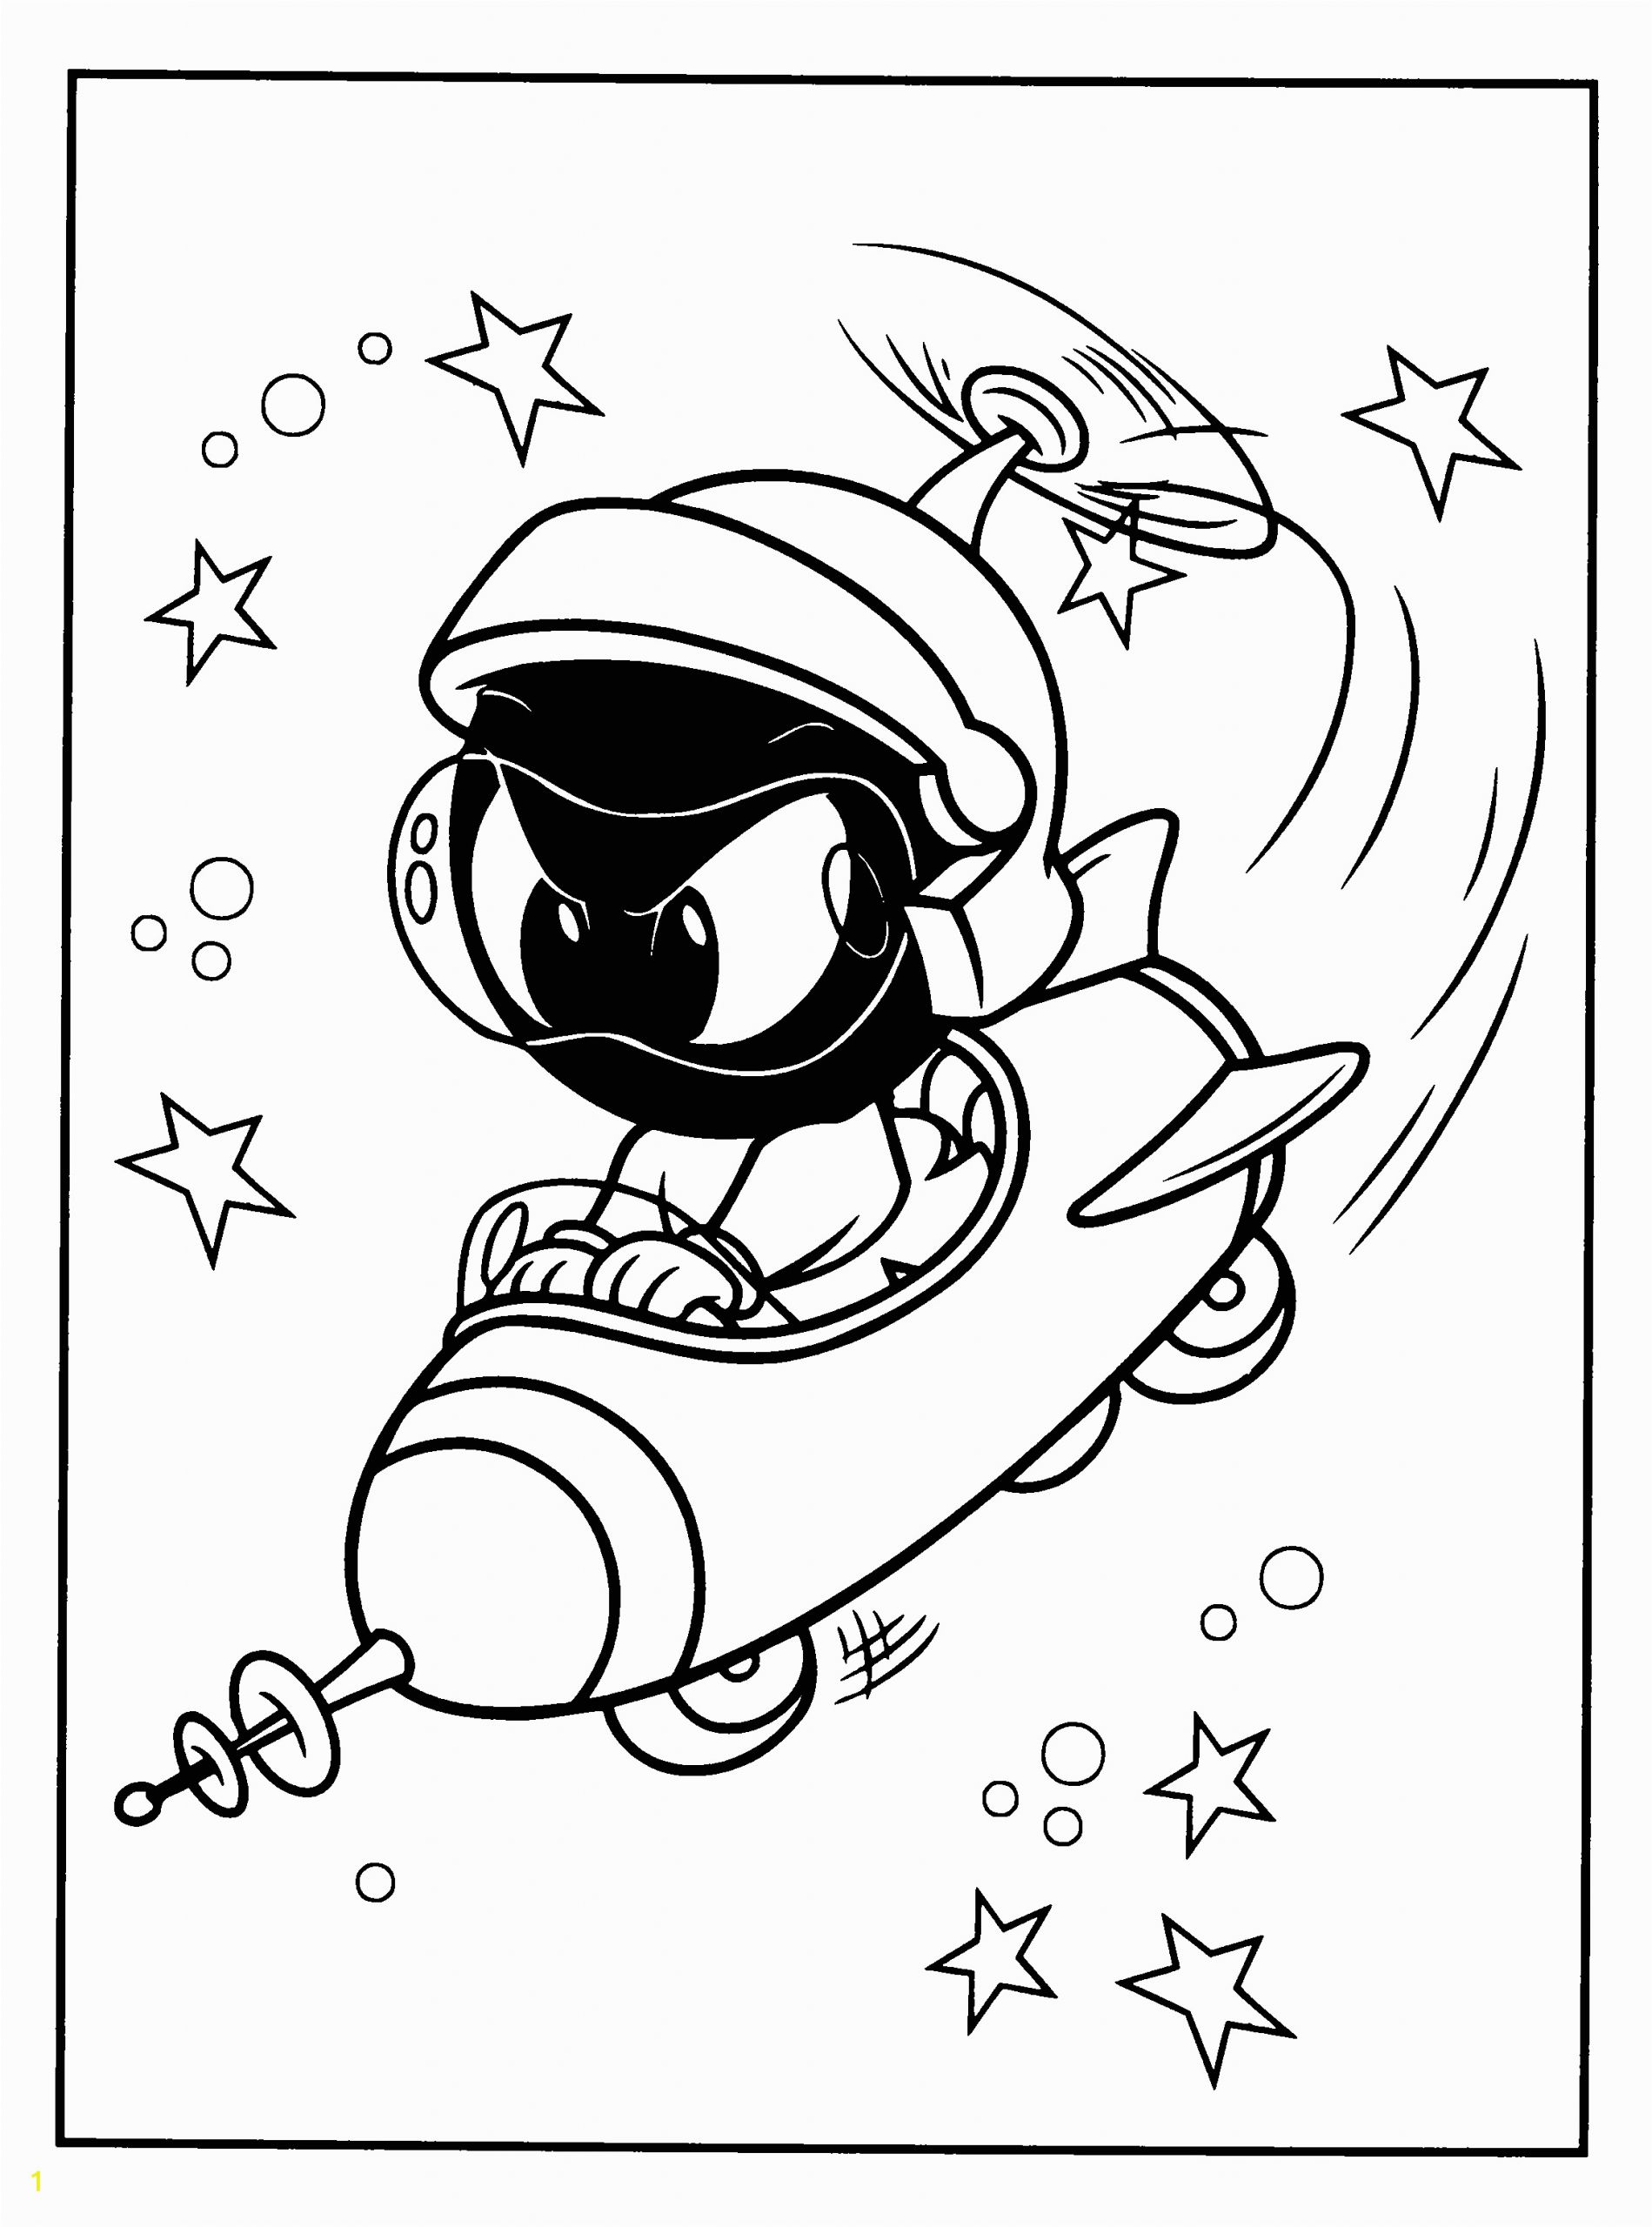 Free Printable Looney Tunes Coloring Pages Looney Tunes Coloring Pages Coloringpages1001